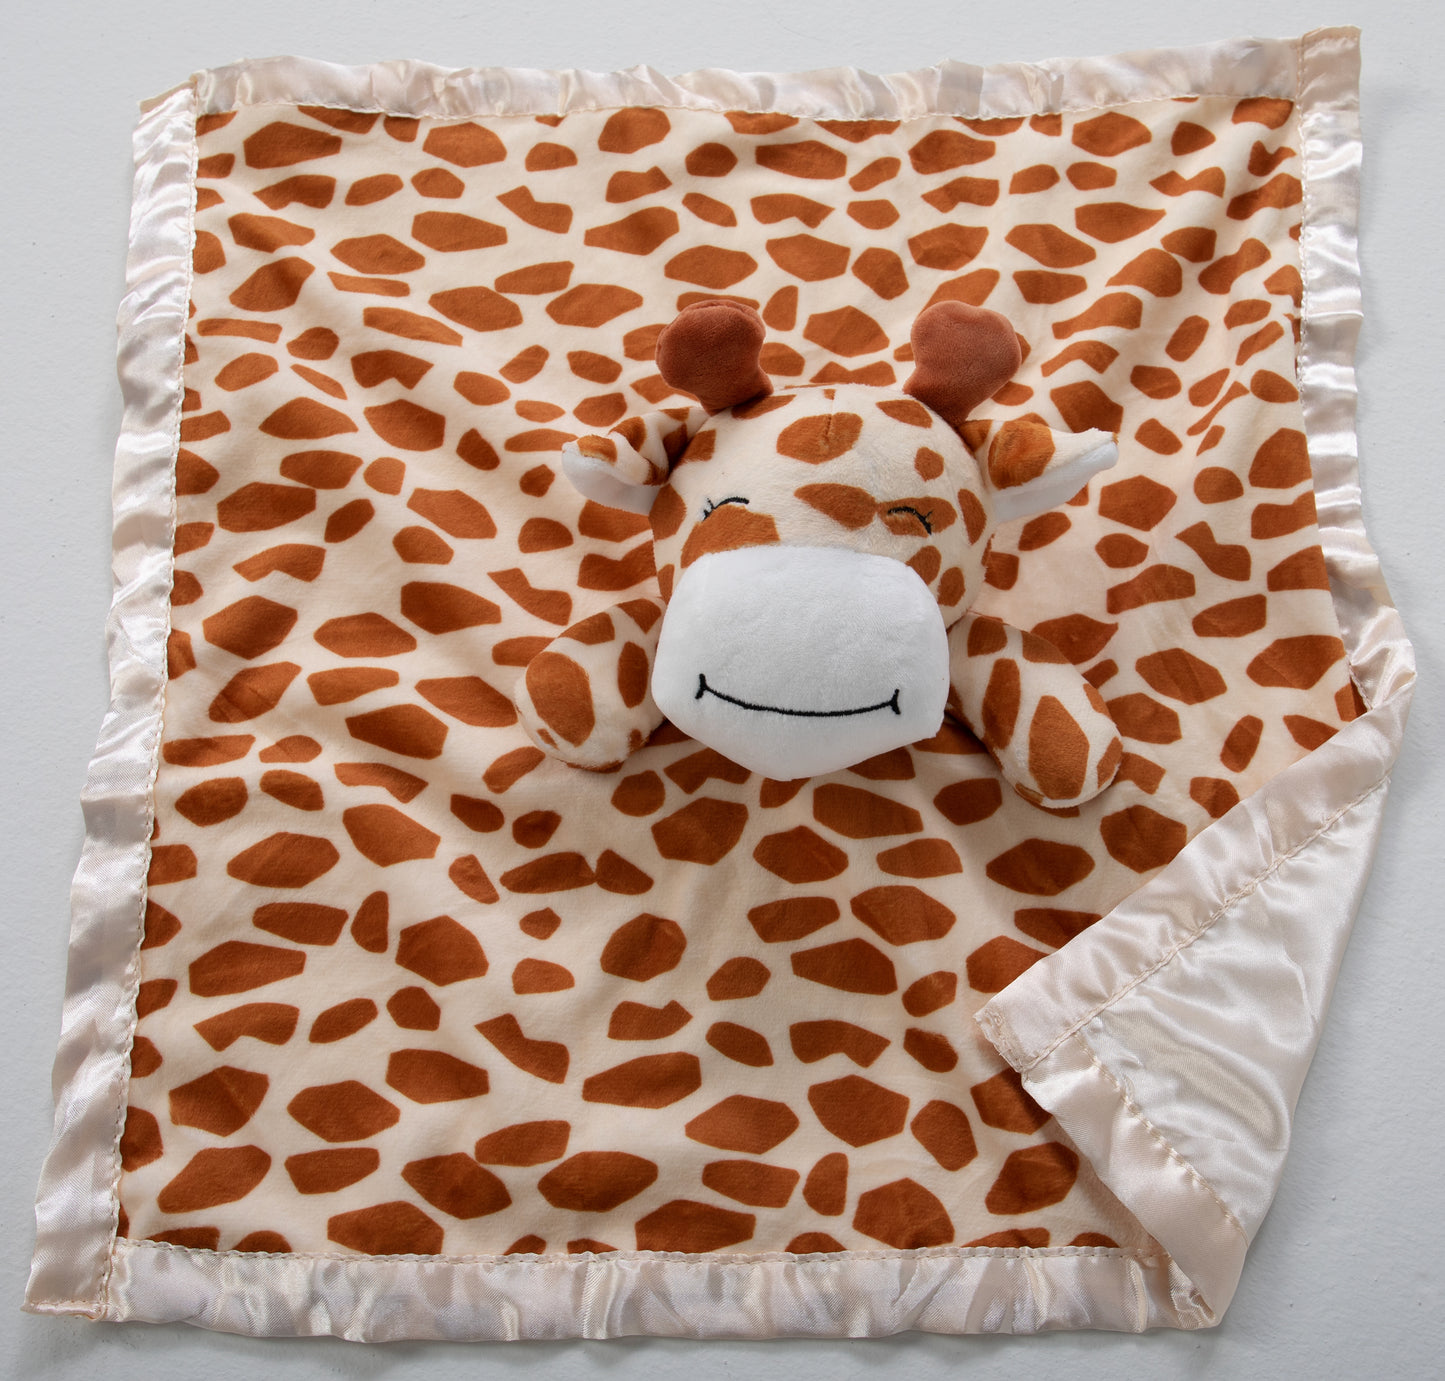 Our adorable stuffed giraffe lovey and security blanket companion is the perfect cuddly friend for your baby. Crafted with love, it's sure to provide comfort and companionship throughout the early years.  Made of soft plush and lined with satin, this lovable animal is sure to be your baby's new best friend.